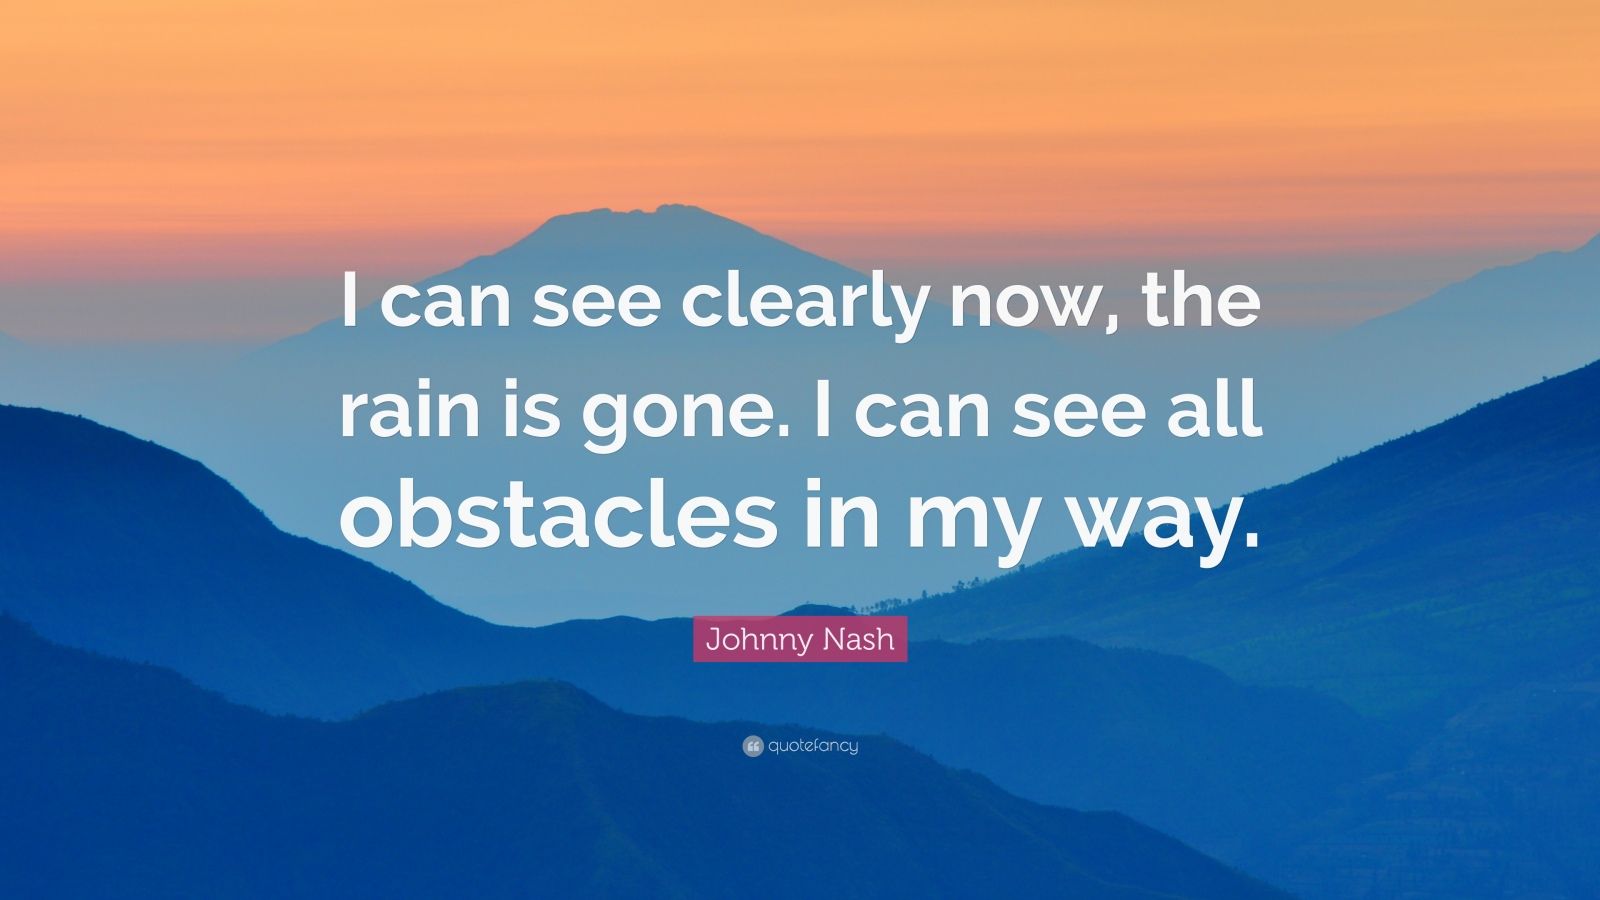 Johnny Nash Quote: “I can see clearly now, the rain is gone. I can see